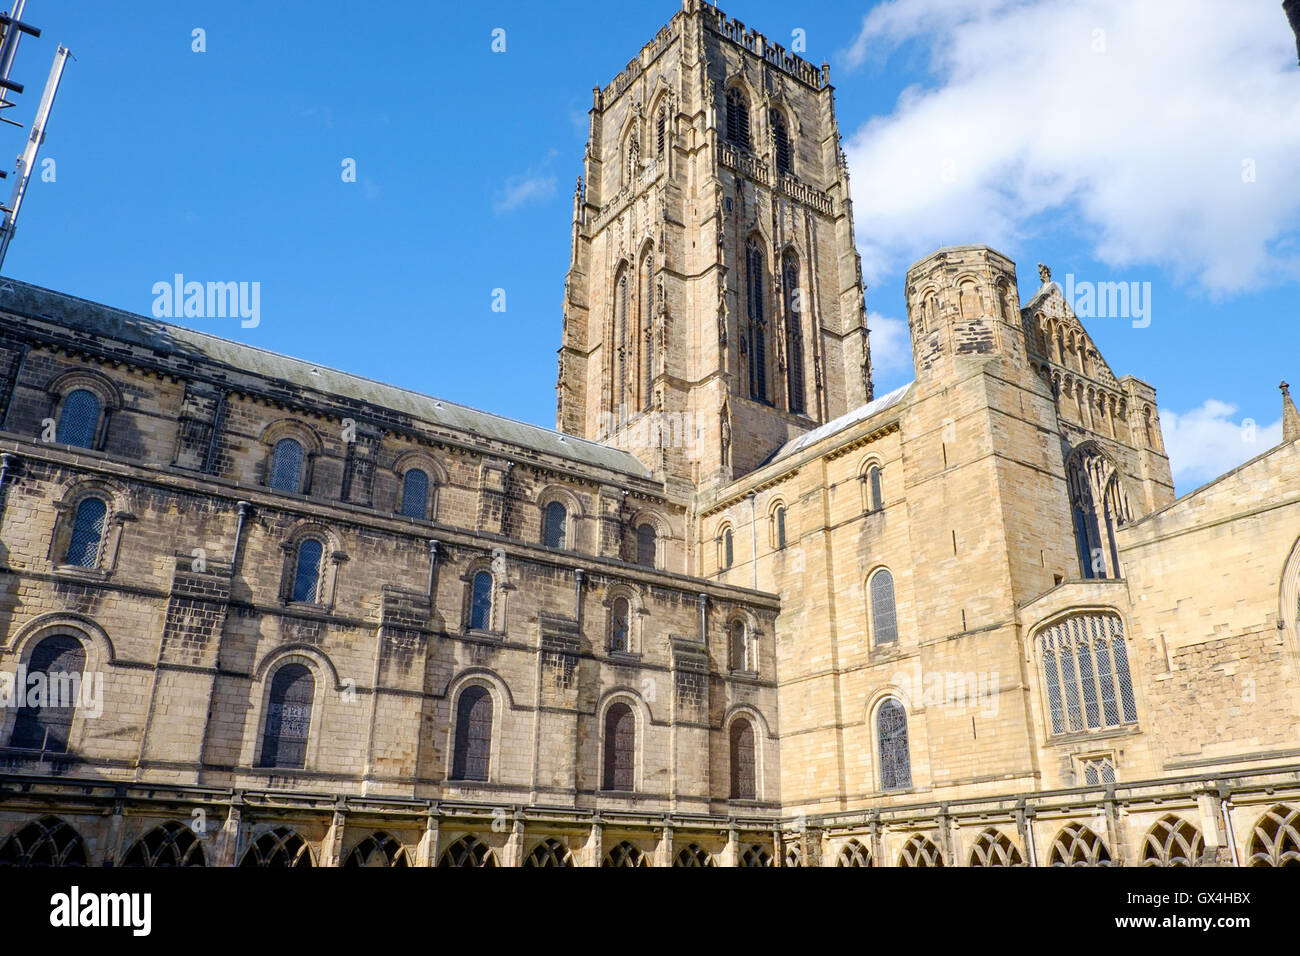 Chiostro centrale a Durham Durham Catherdial Inghilterra Foto Stock